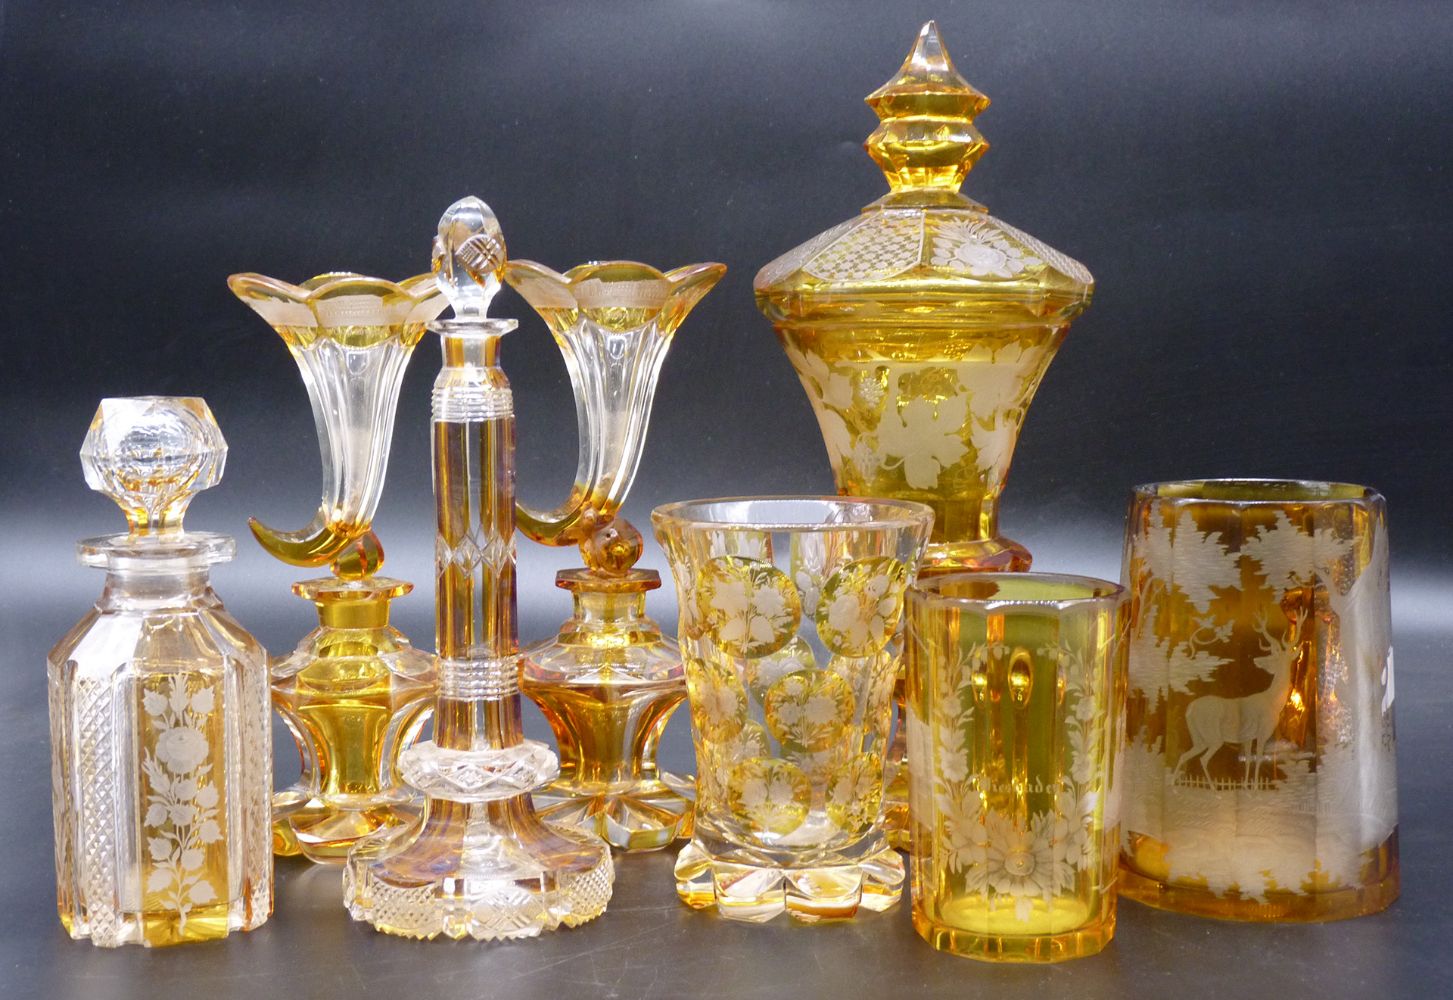 Special Late January Auction of Miscellaneous Objets d'Art, Collectables, Porcelain, Glass, Antique & Country Furniture